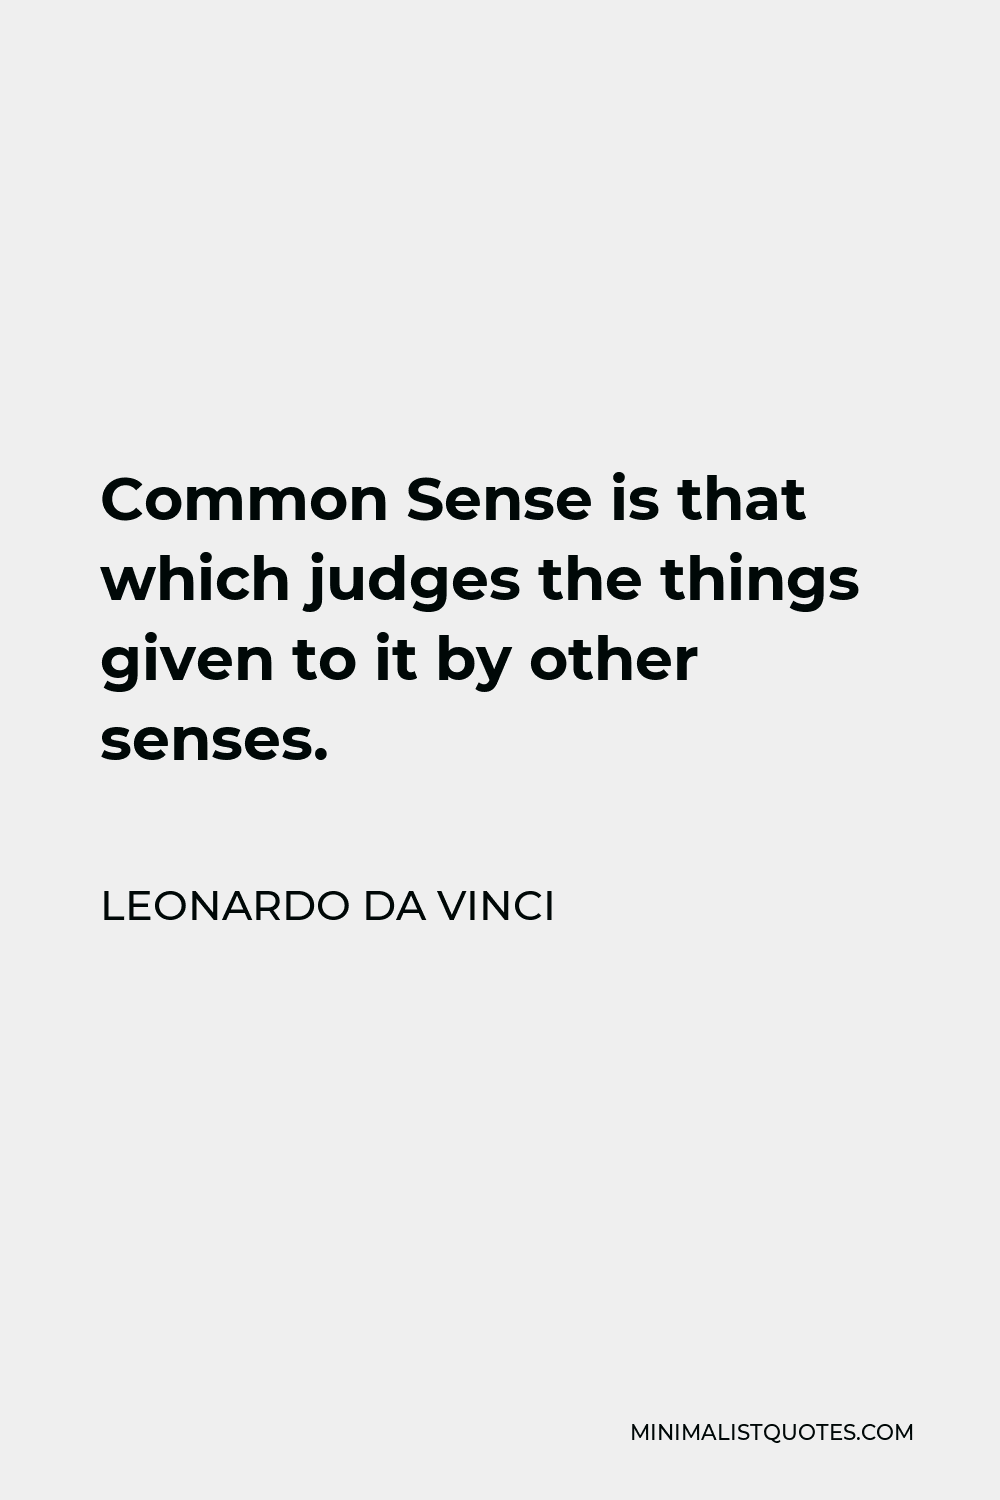 Leonardo da Vinci Quote - Common Sense is that which judges the things given to it by other senses.